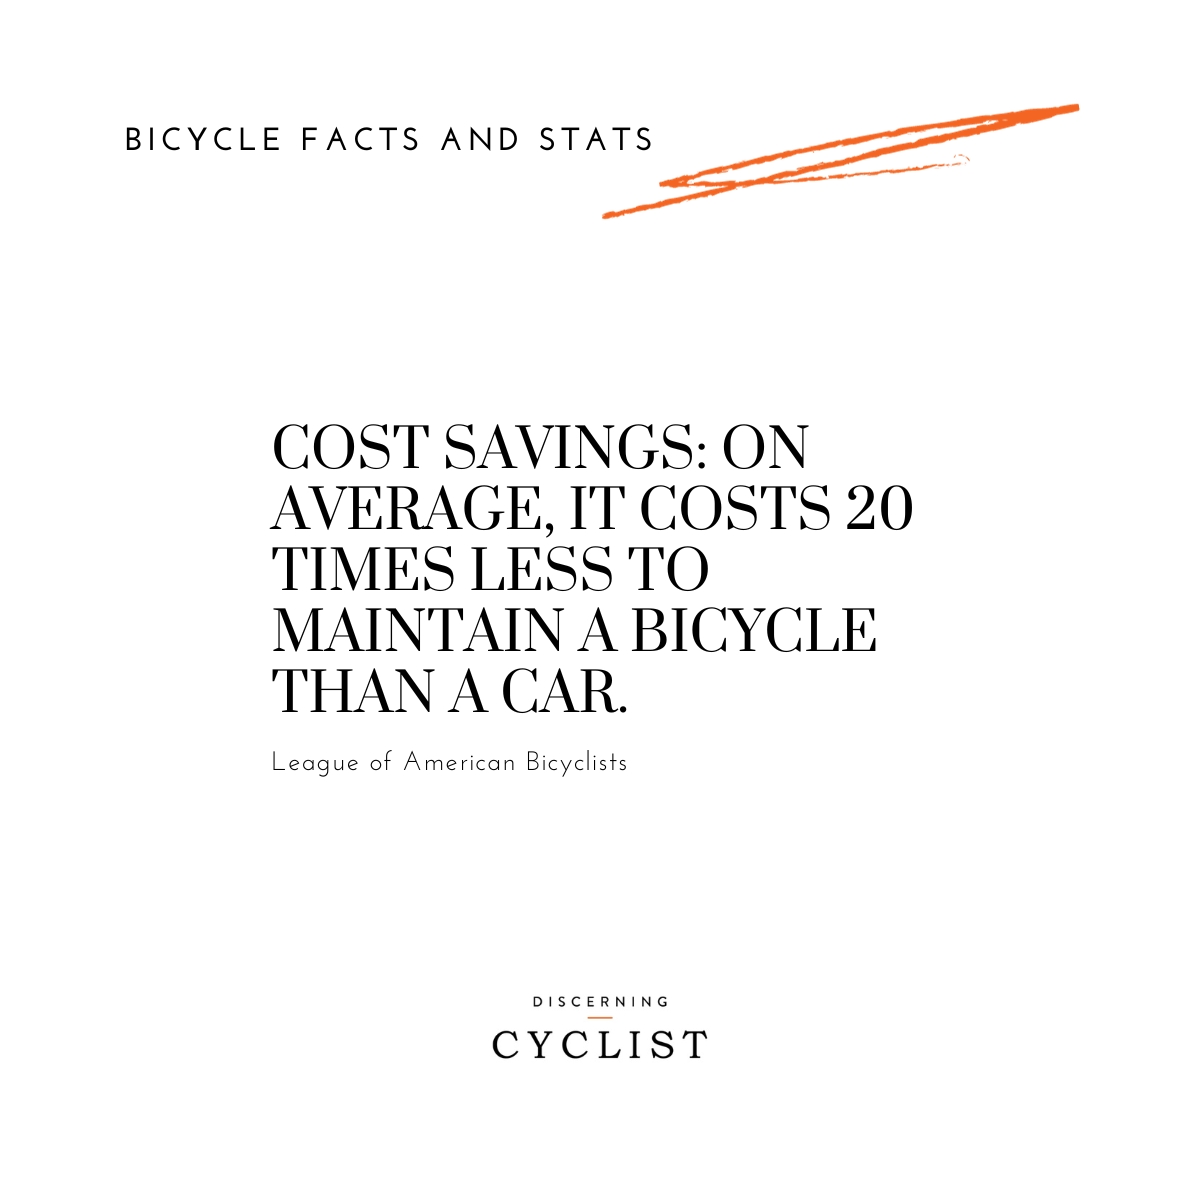 Cost Savings: On average, it costs 20 times less to maintain a bicycle than a car.